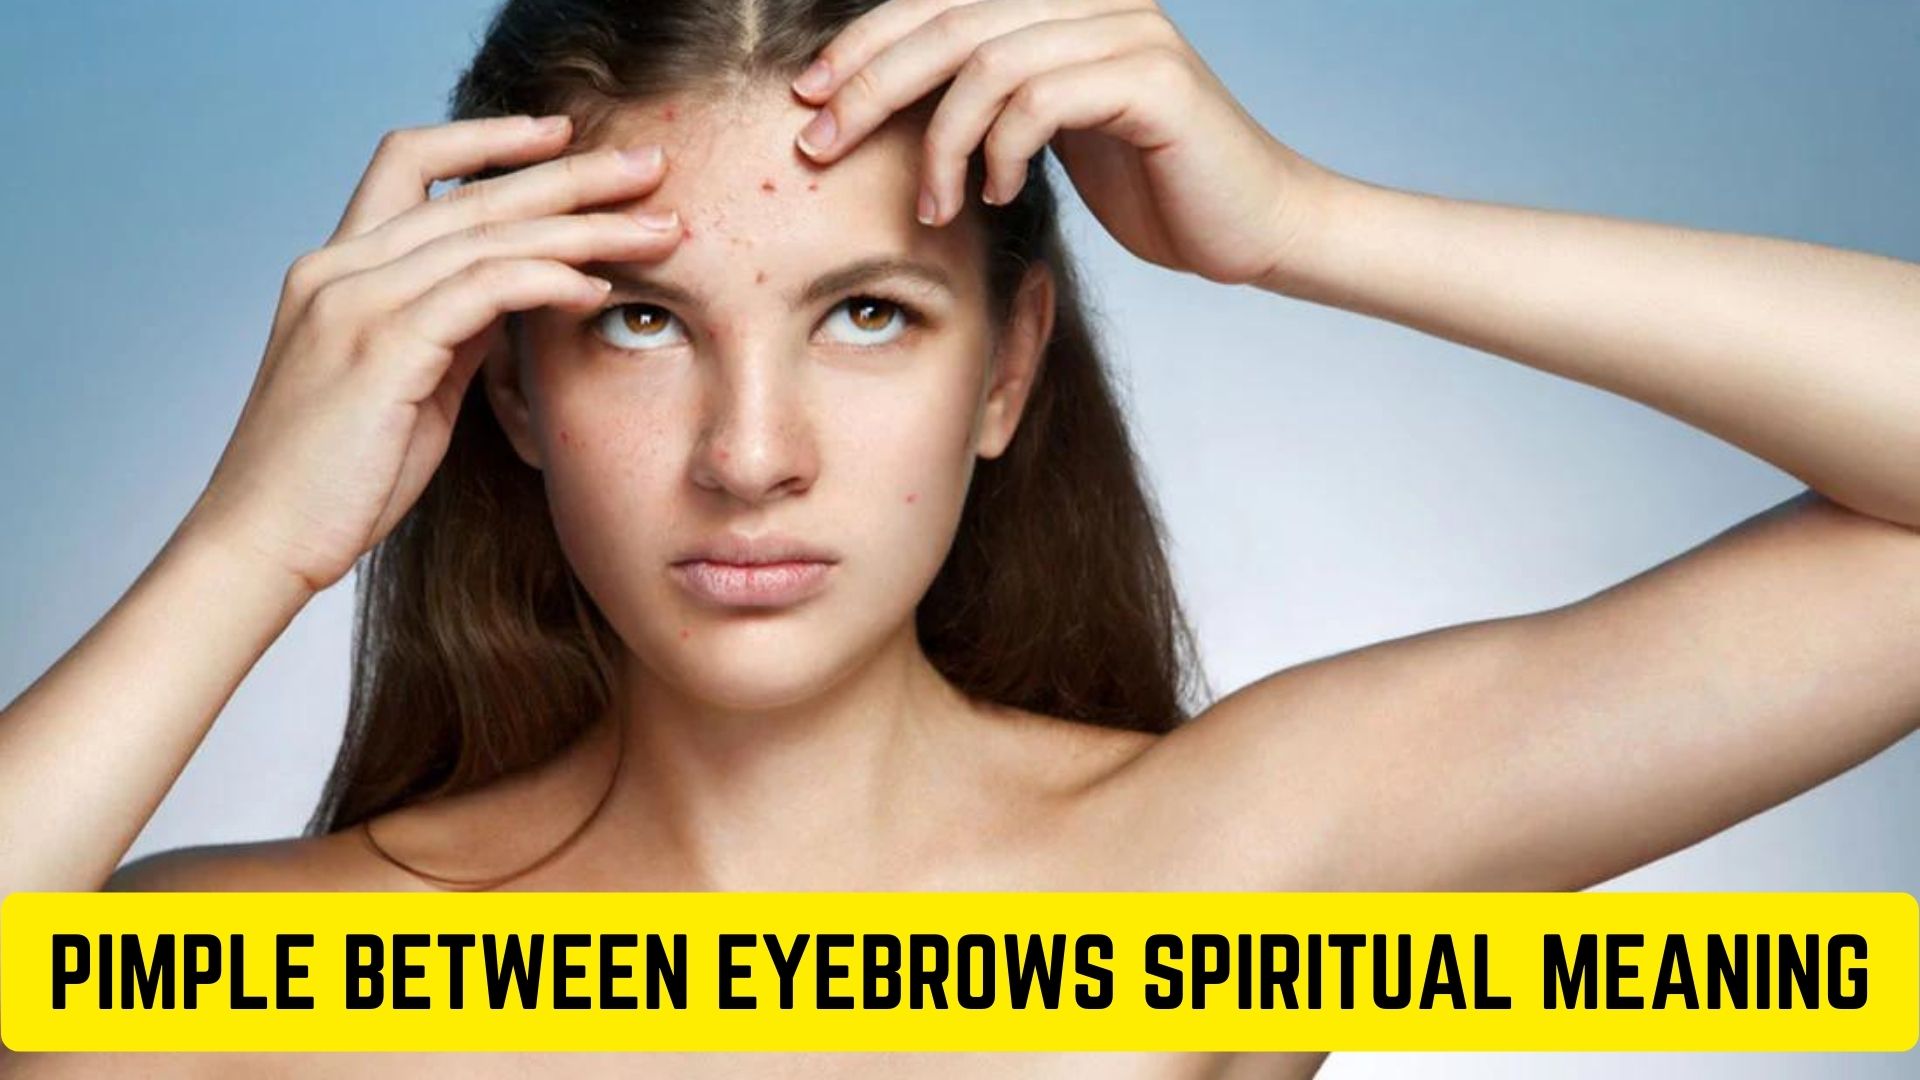 Pimple Between Eyebrows Spiritual Meaning - A Growing Pressure